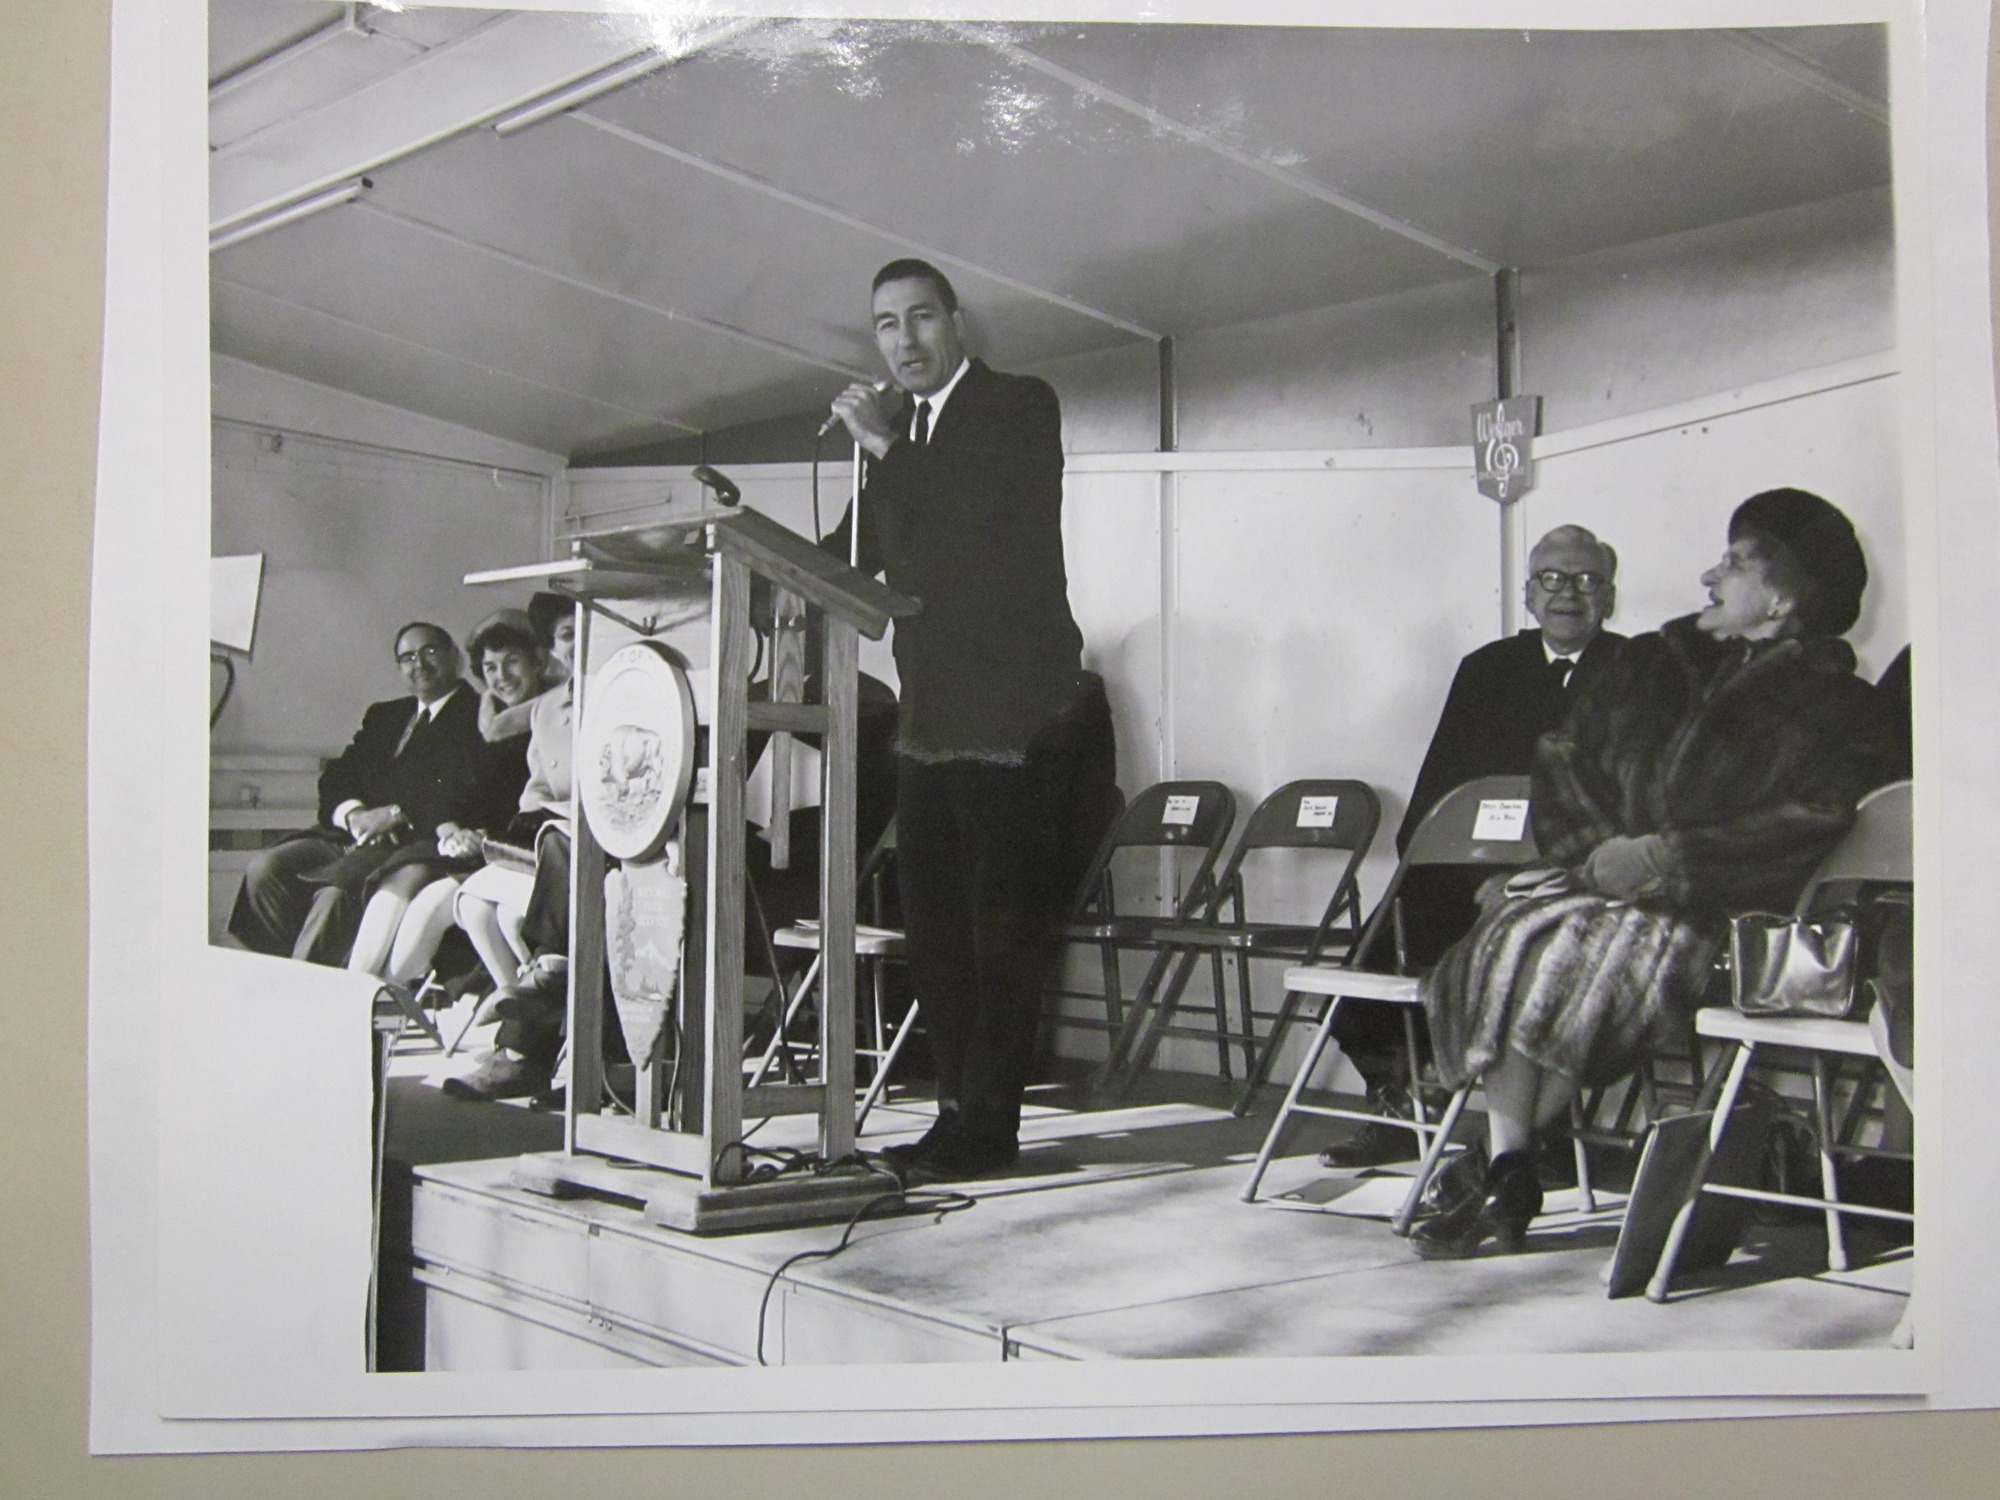 Interior Secretary Udell standing at the podium.  Two people seated to the right, and three on his left.